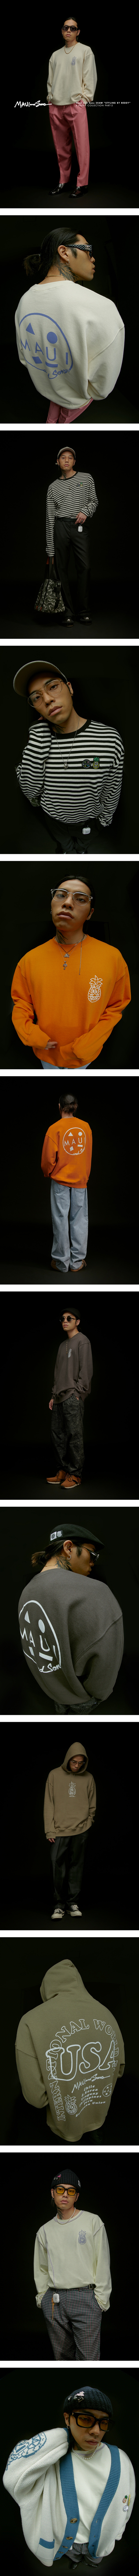 20 A/W Styling by REDDY,Part.2